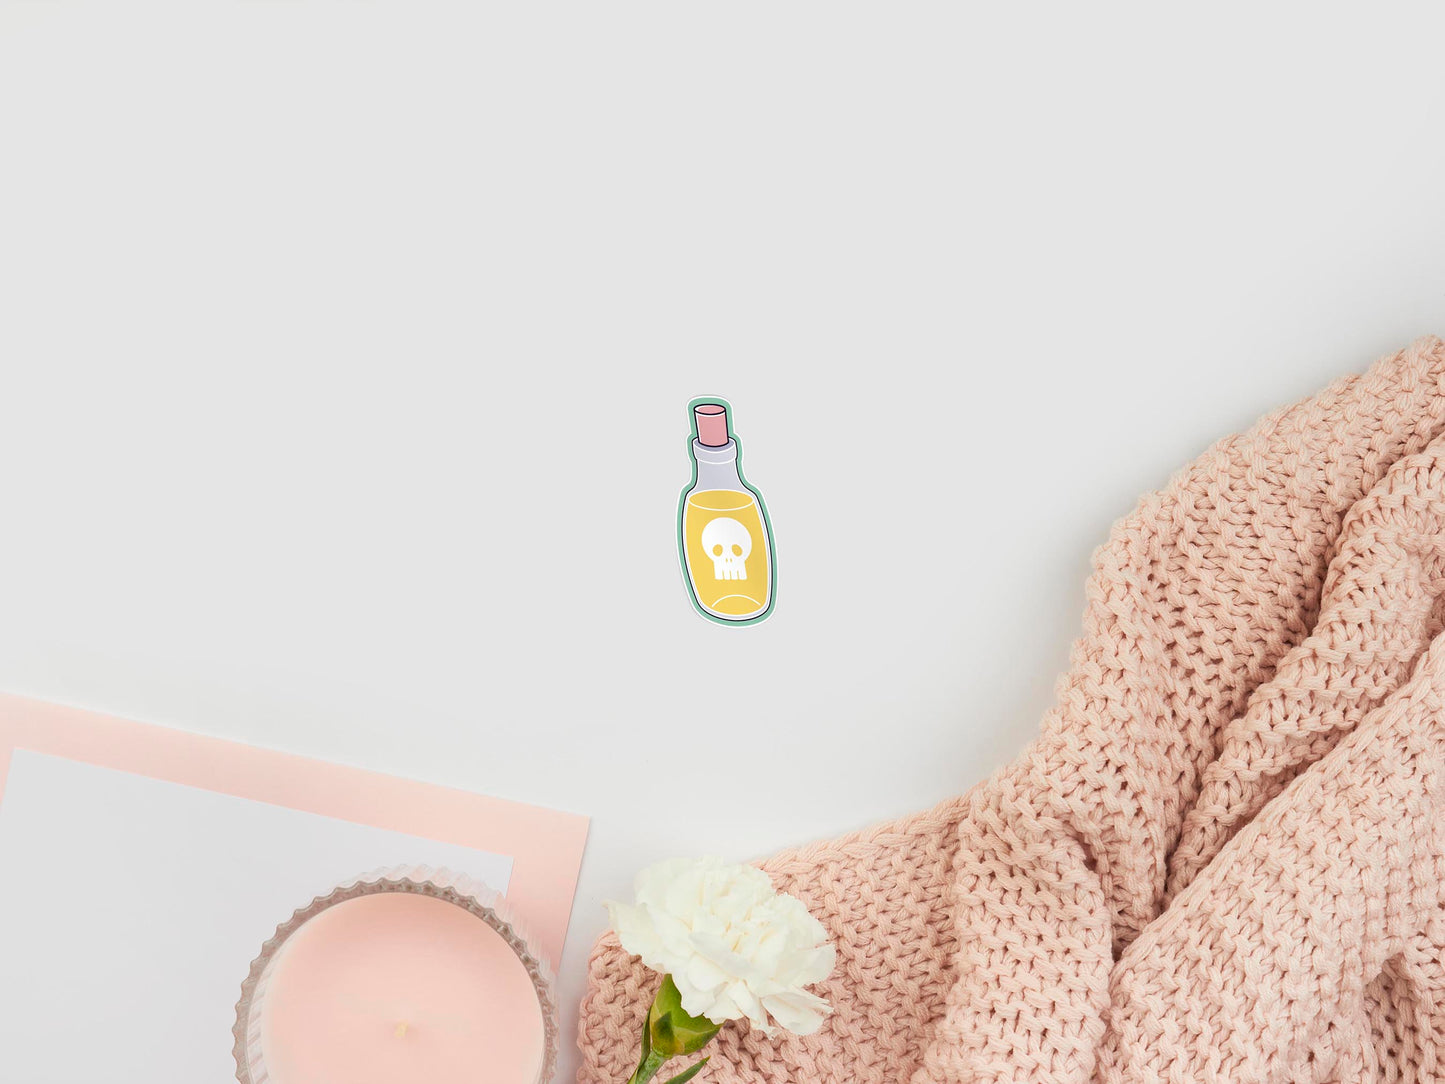 Large sticker of digital illustration cartoon of a clear potion bottle with a pink cork, filled with yellow liquid and labelled with a skull icon